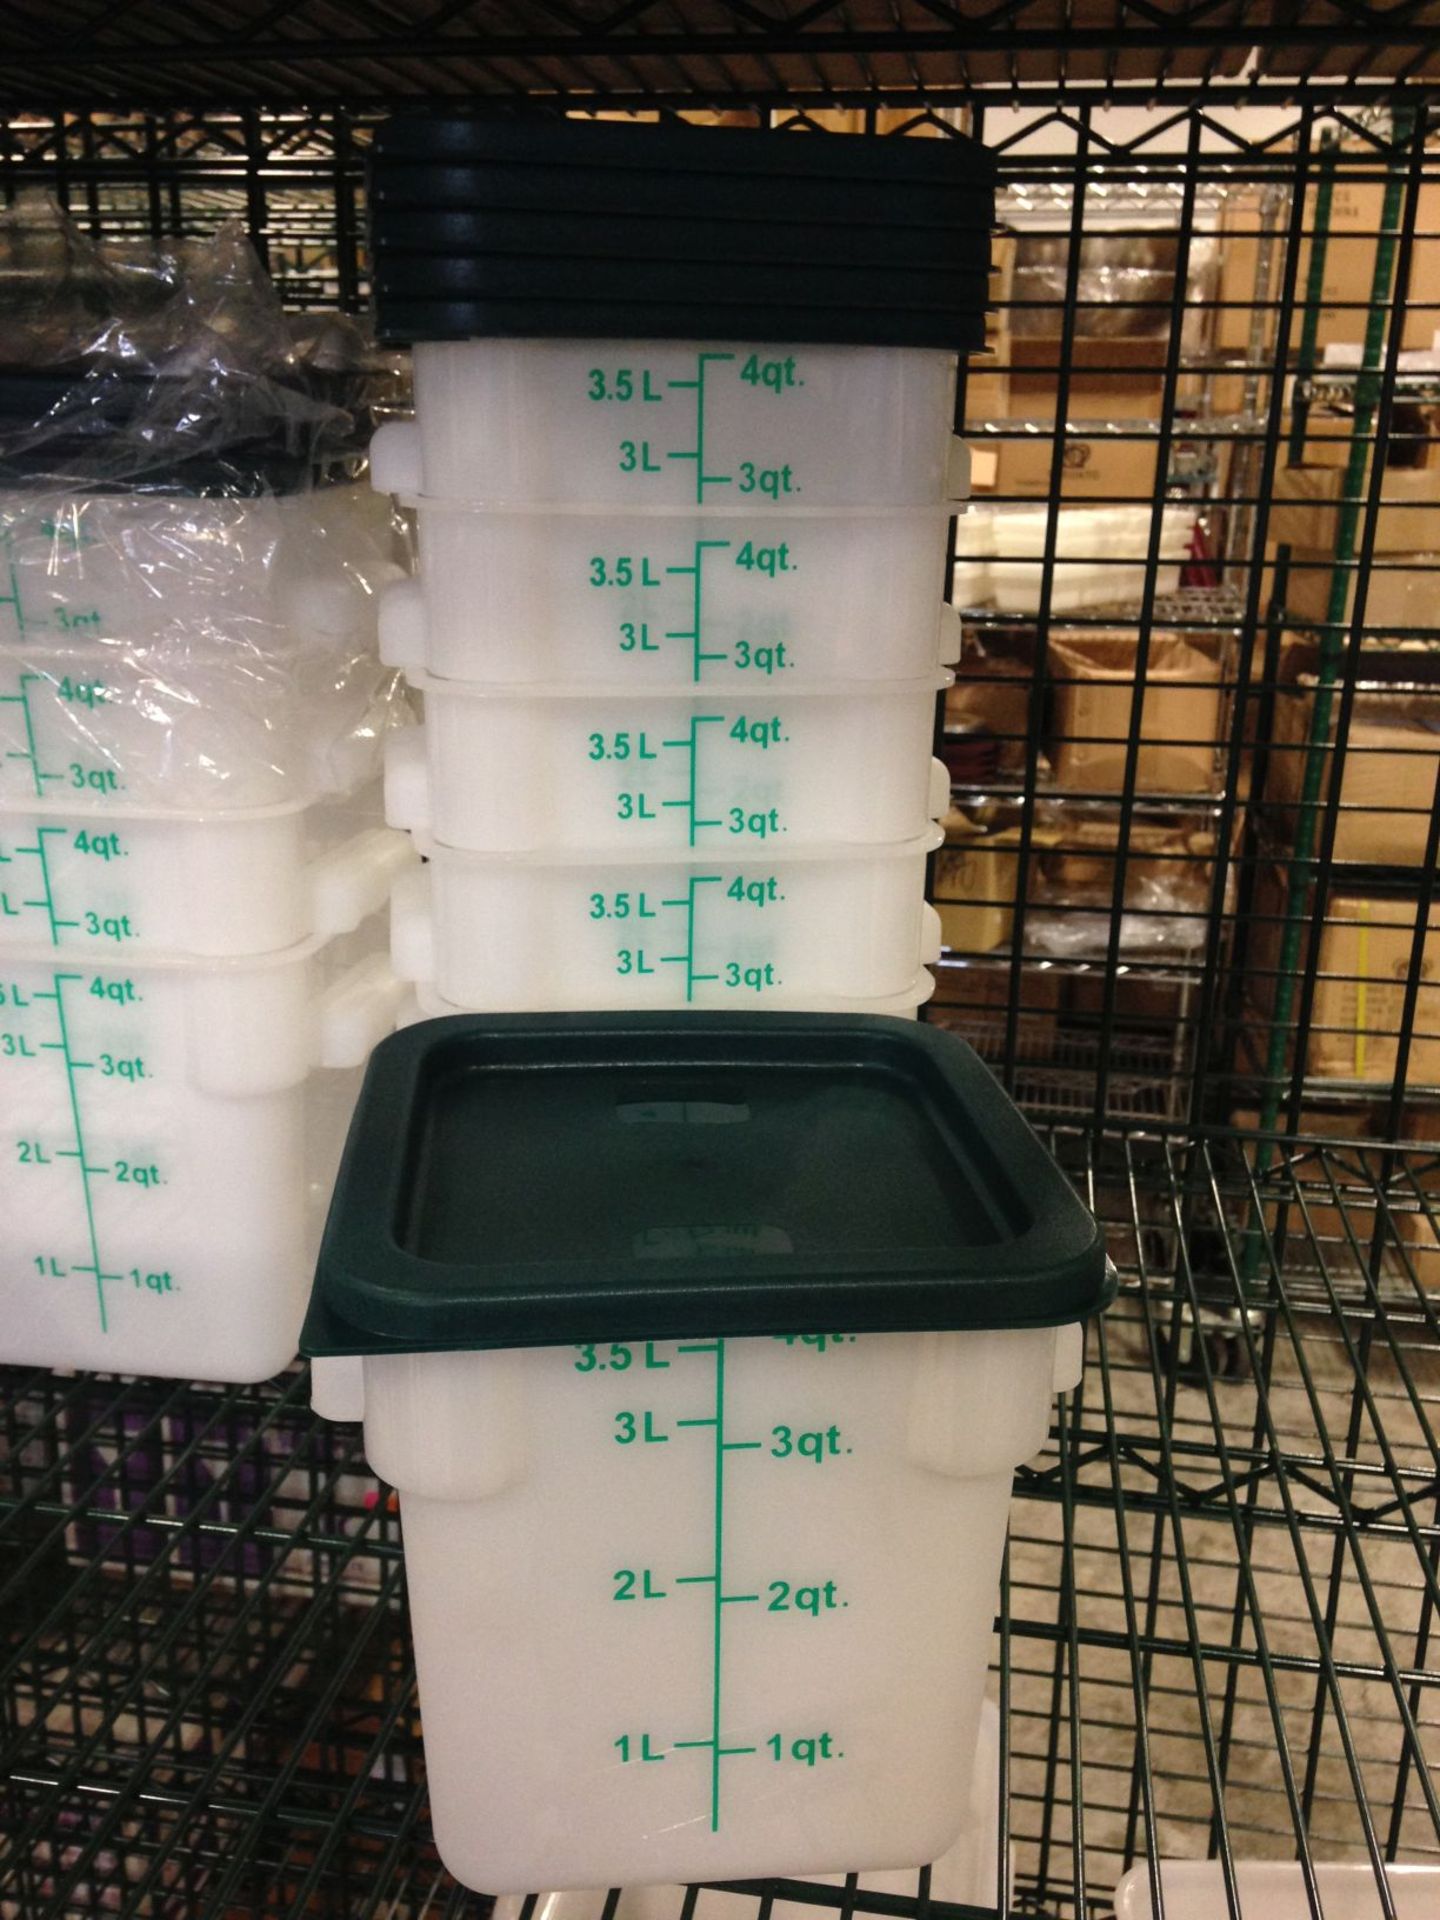 4qt Ingredient Bins with Lids - Lot of 6